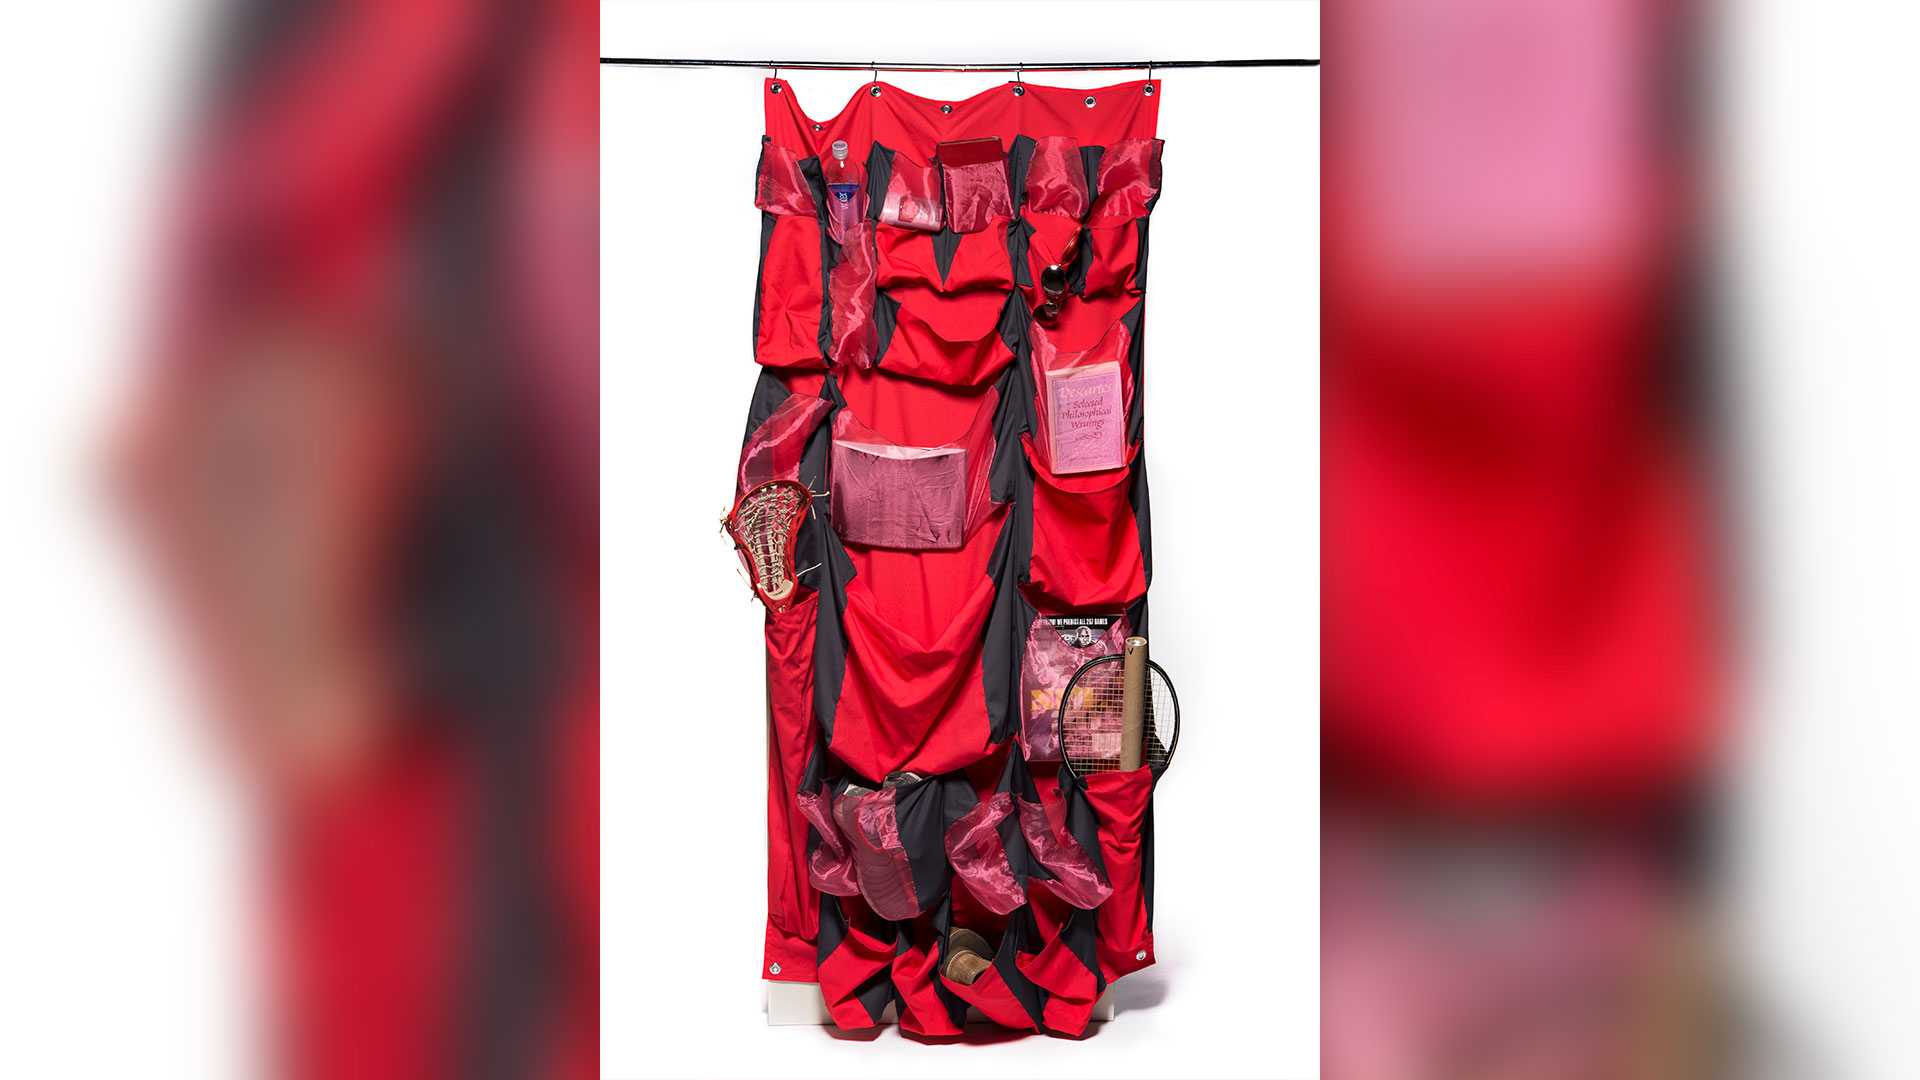 Red curtain on closet pole with front pockets of various sizes with different items inside